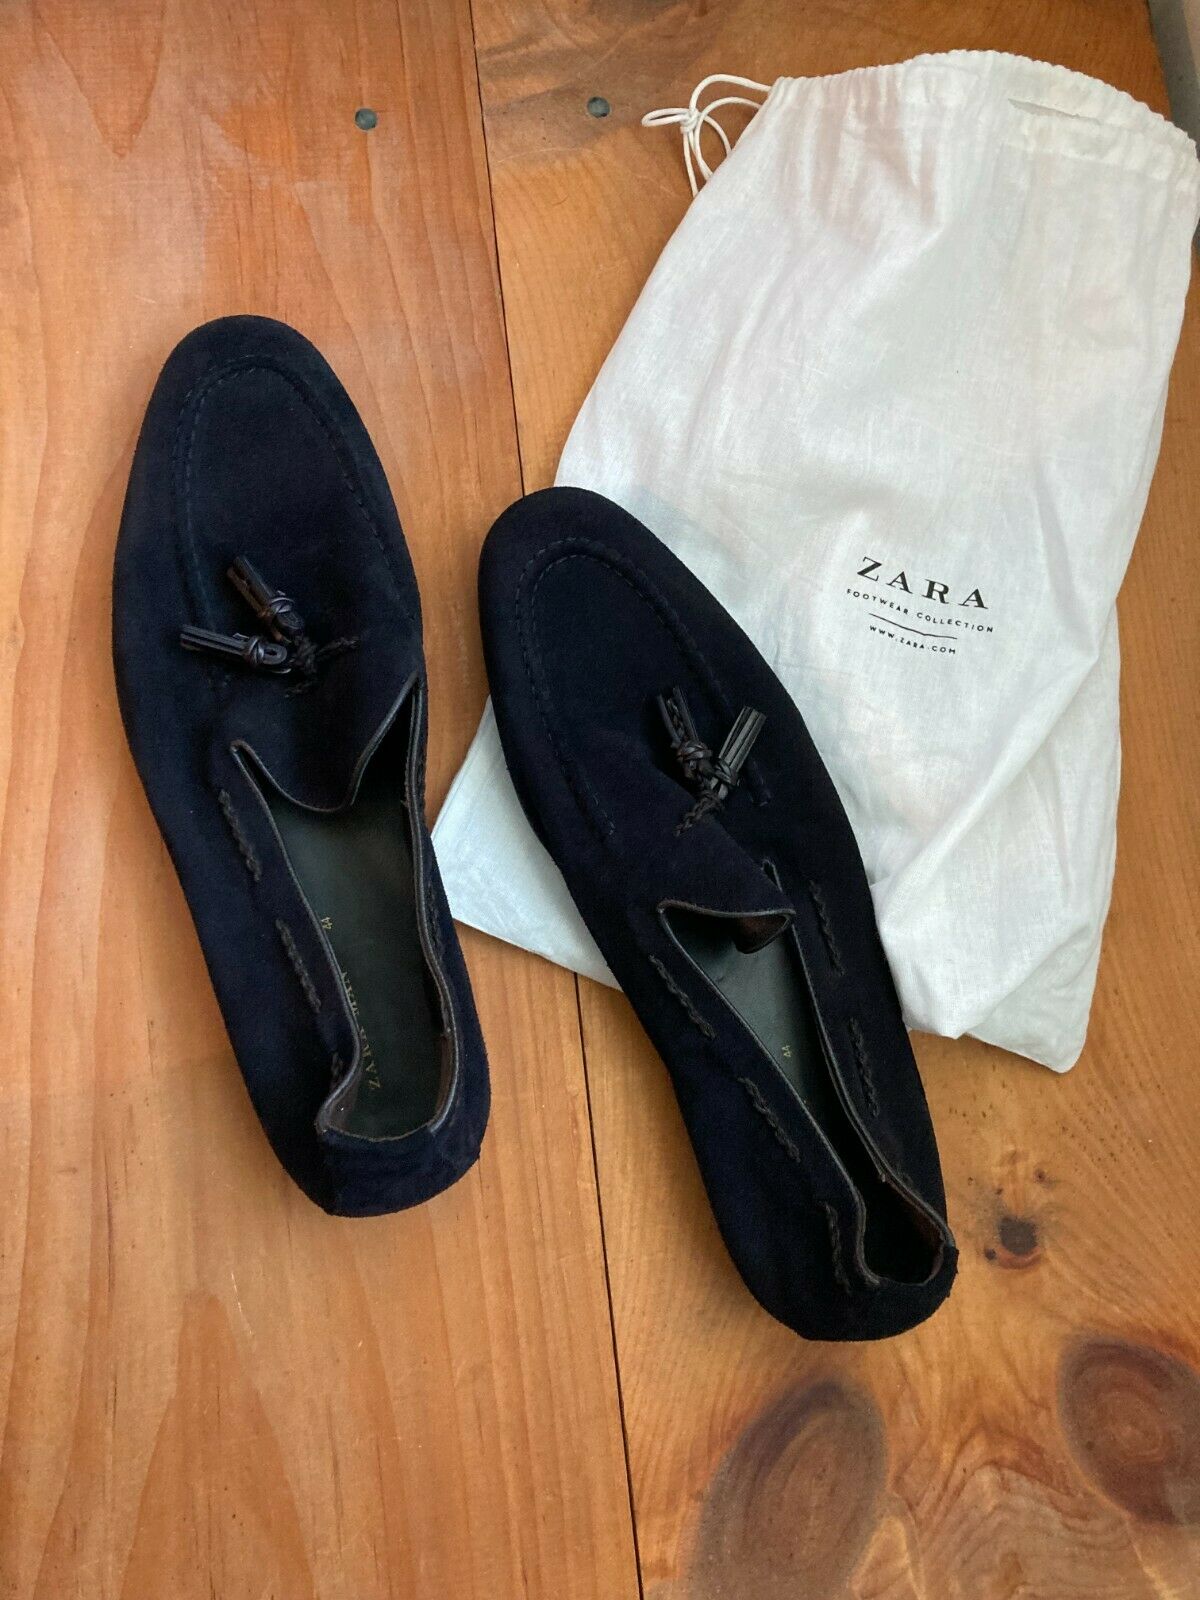 Mens shoes 11, ZARA Made in Portugal